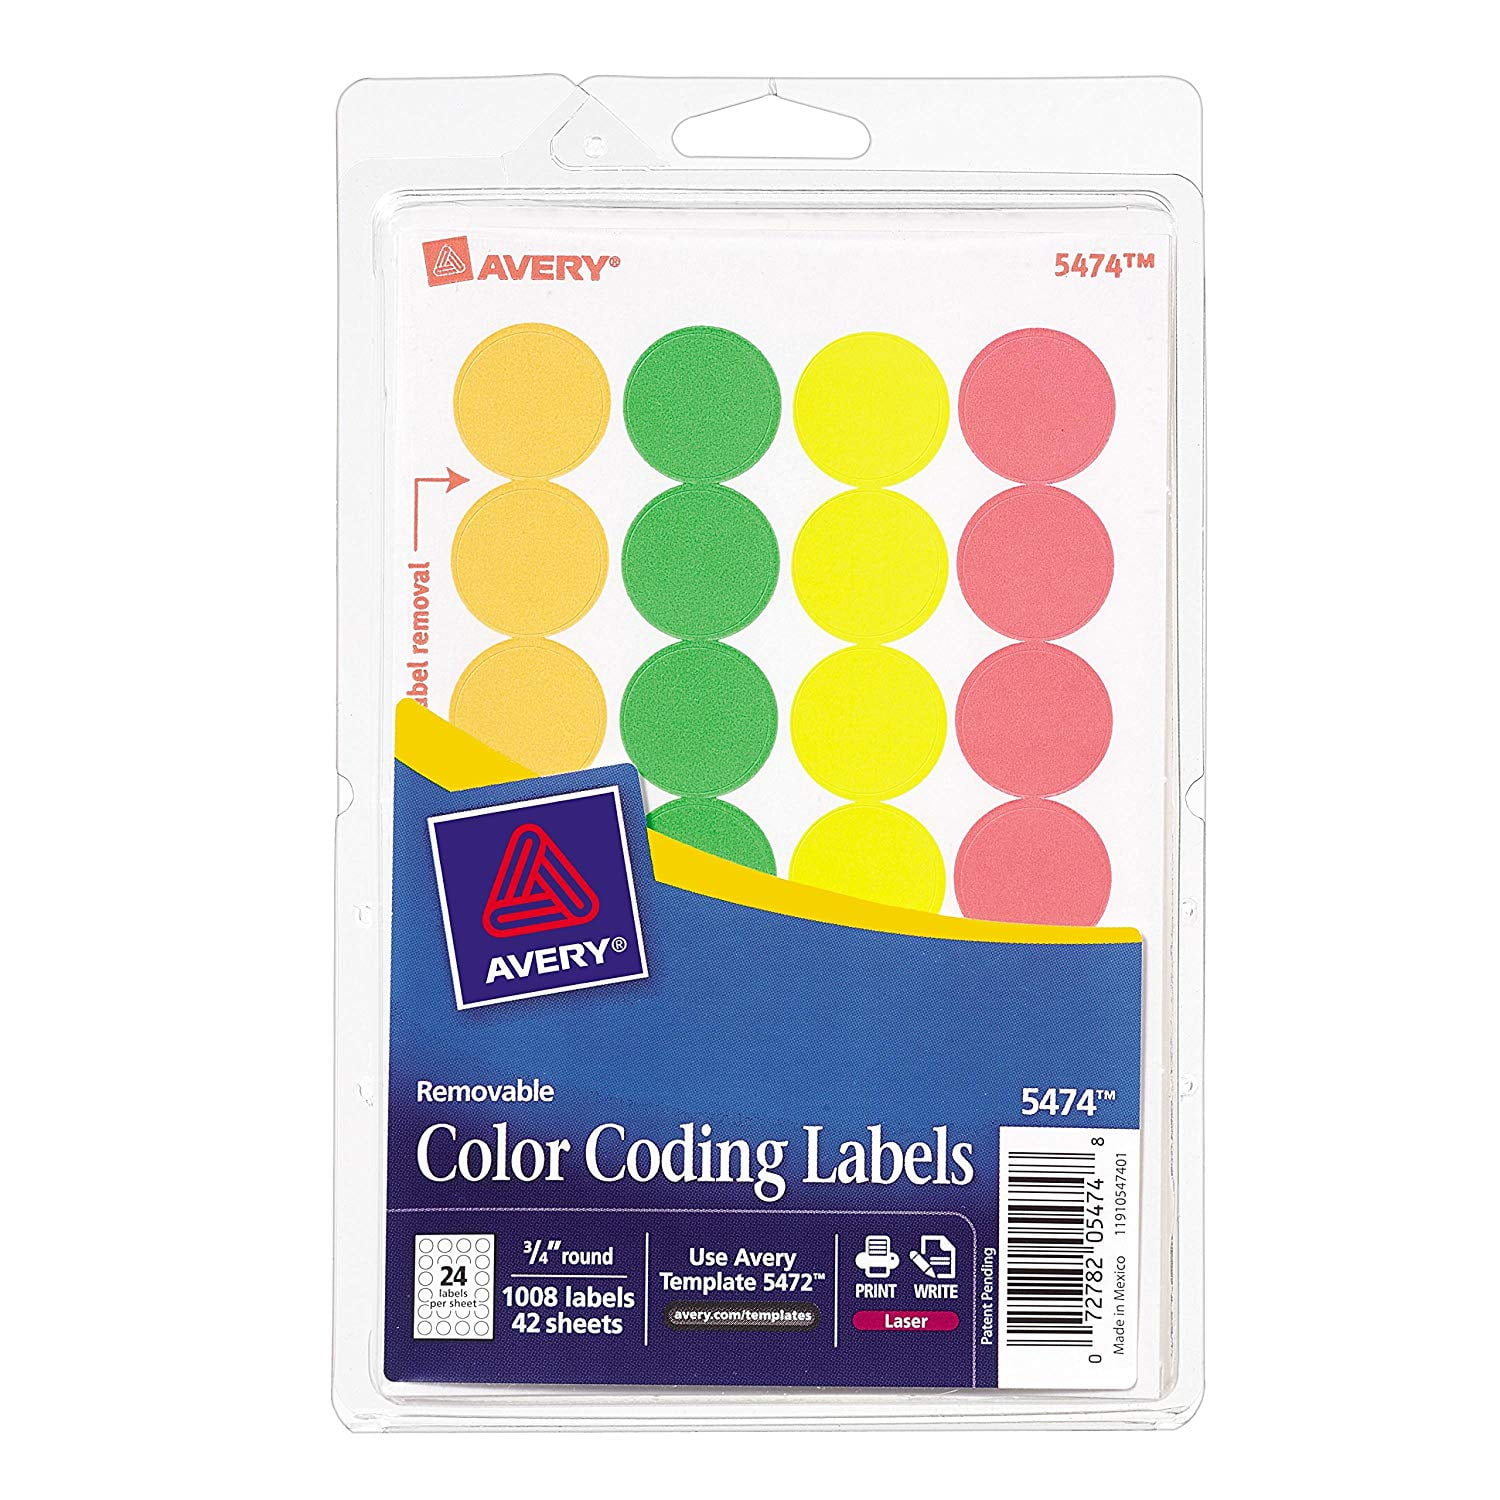 Download Removable Print or Write Color Coding Labels for Laser and Inkjet Printers, 0.75 Inches, Round ...